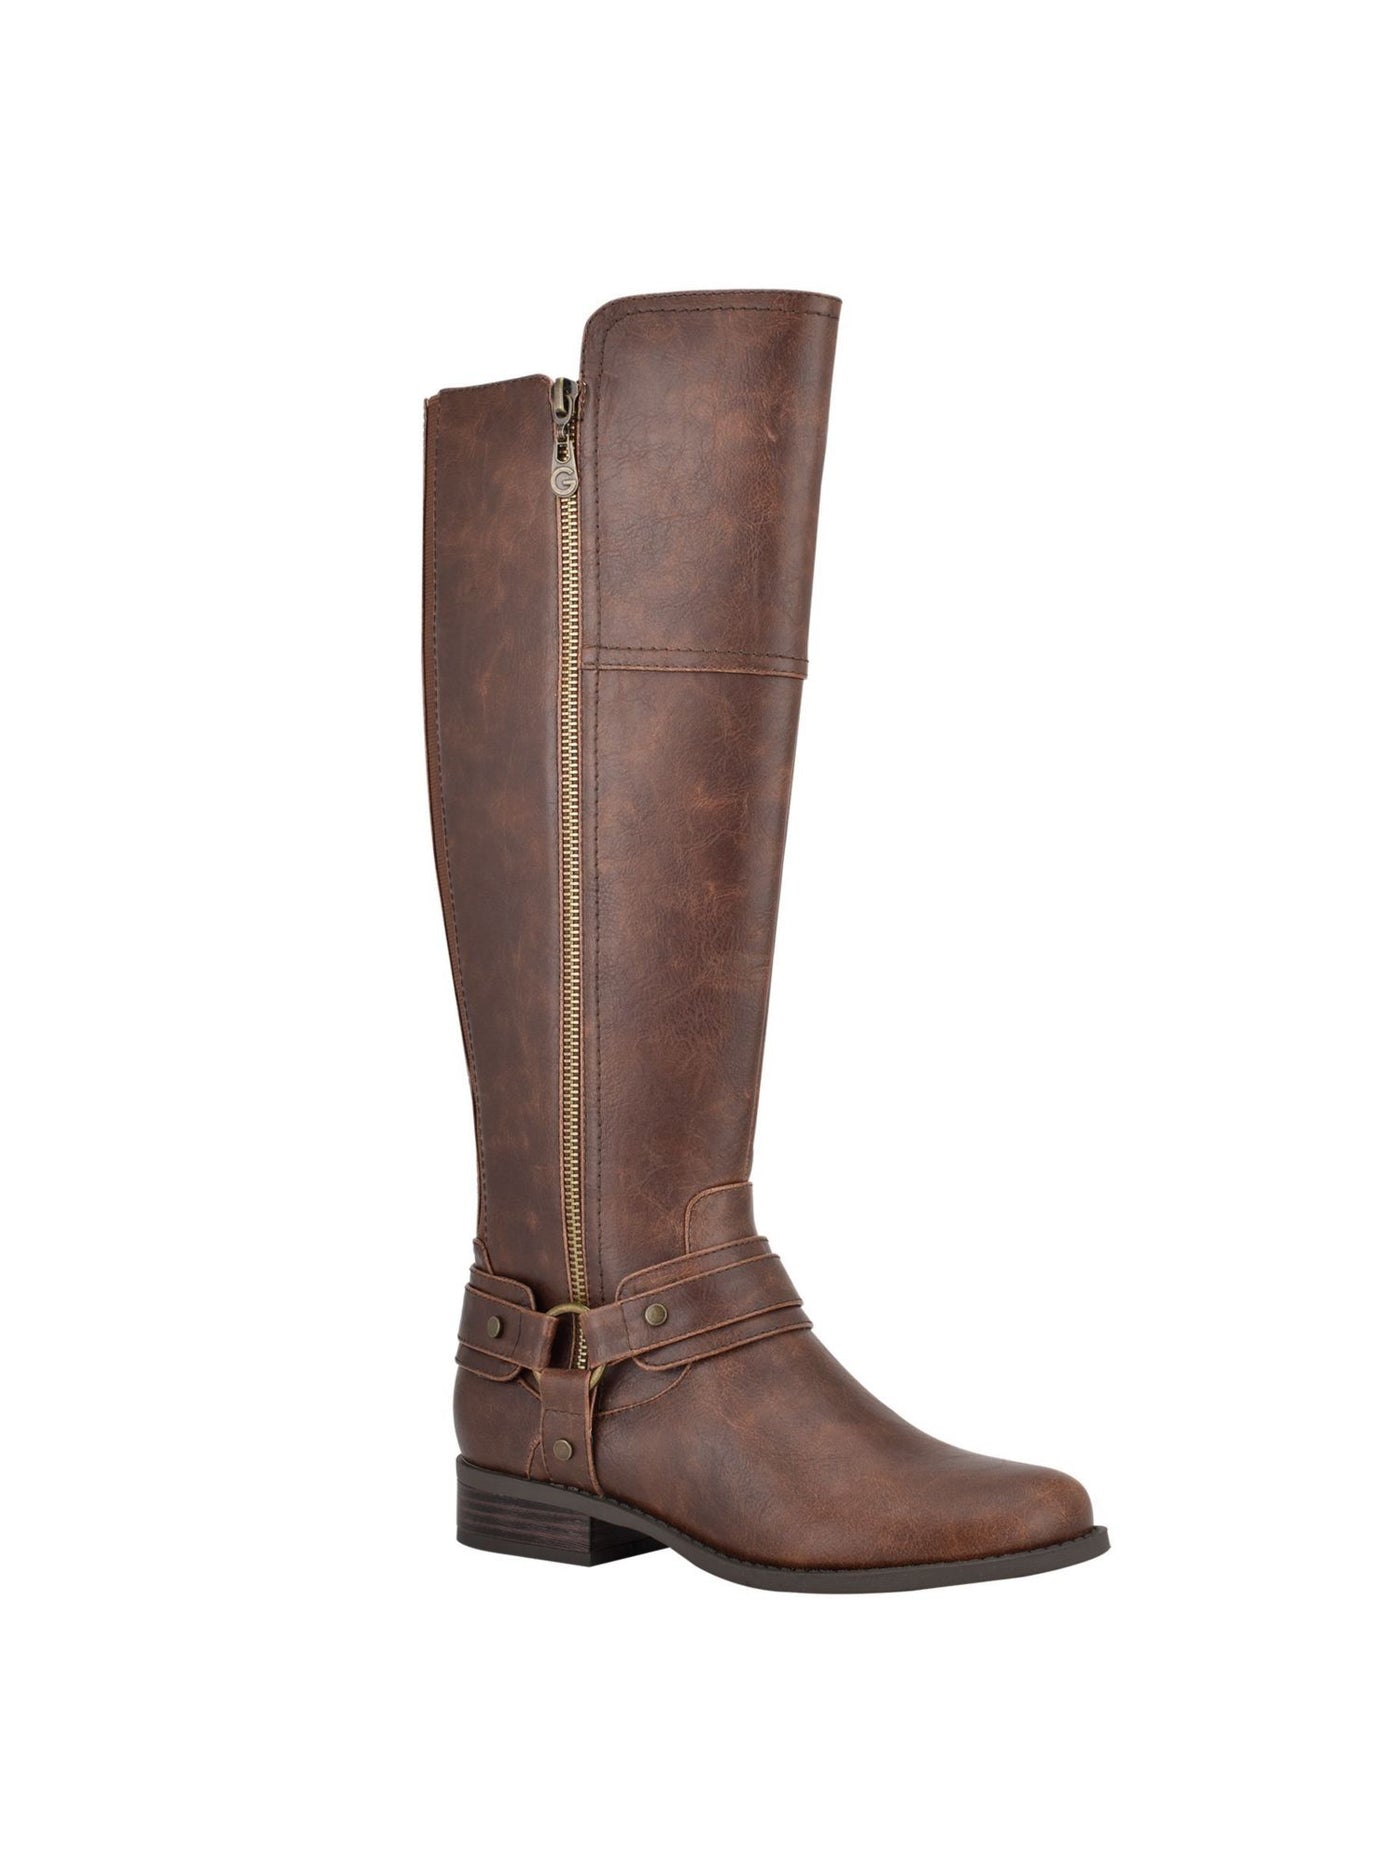 GBG LOS ANGELES Womens Brown Flex Gore Back Accents Gold-Tone Hardware Accent Zipper Accent Buckle Accent Harlea Round Toe Block Heel Zip-Up Riding Boot 6 M